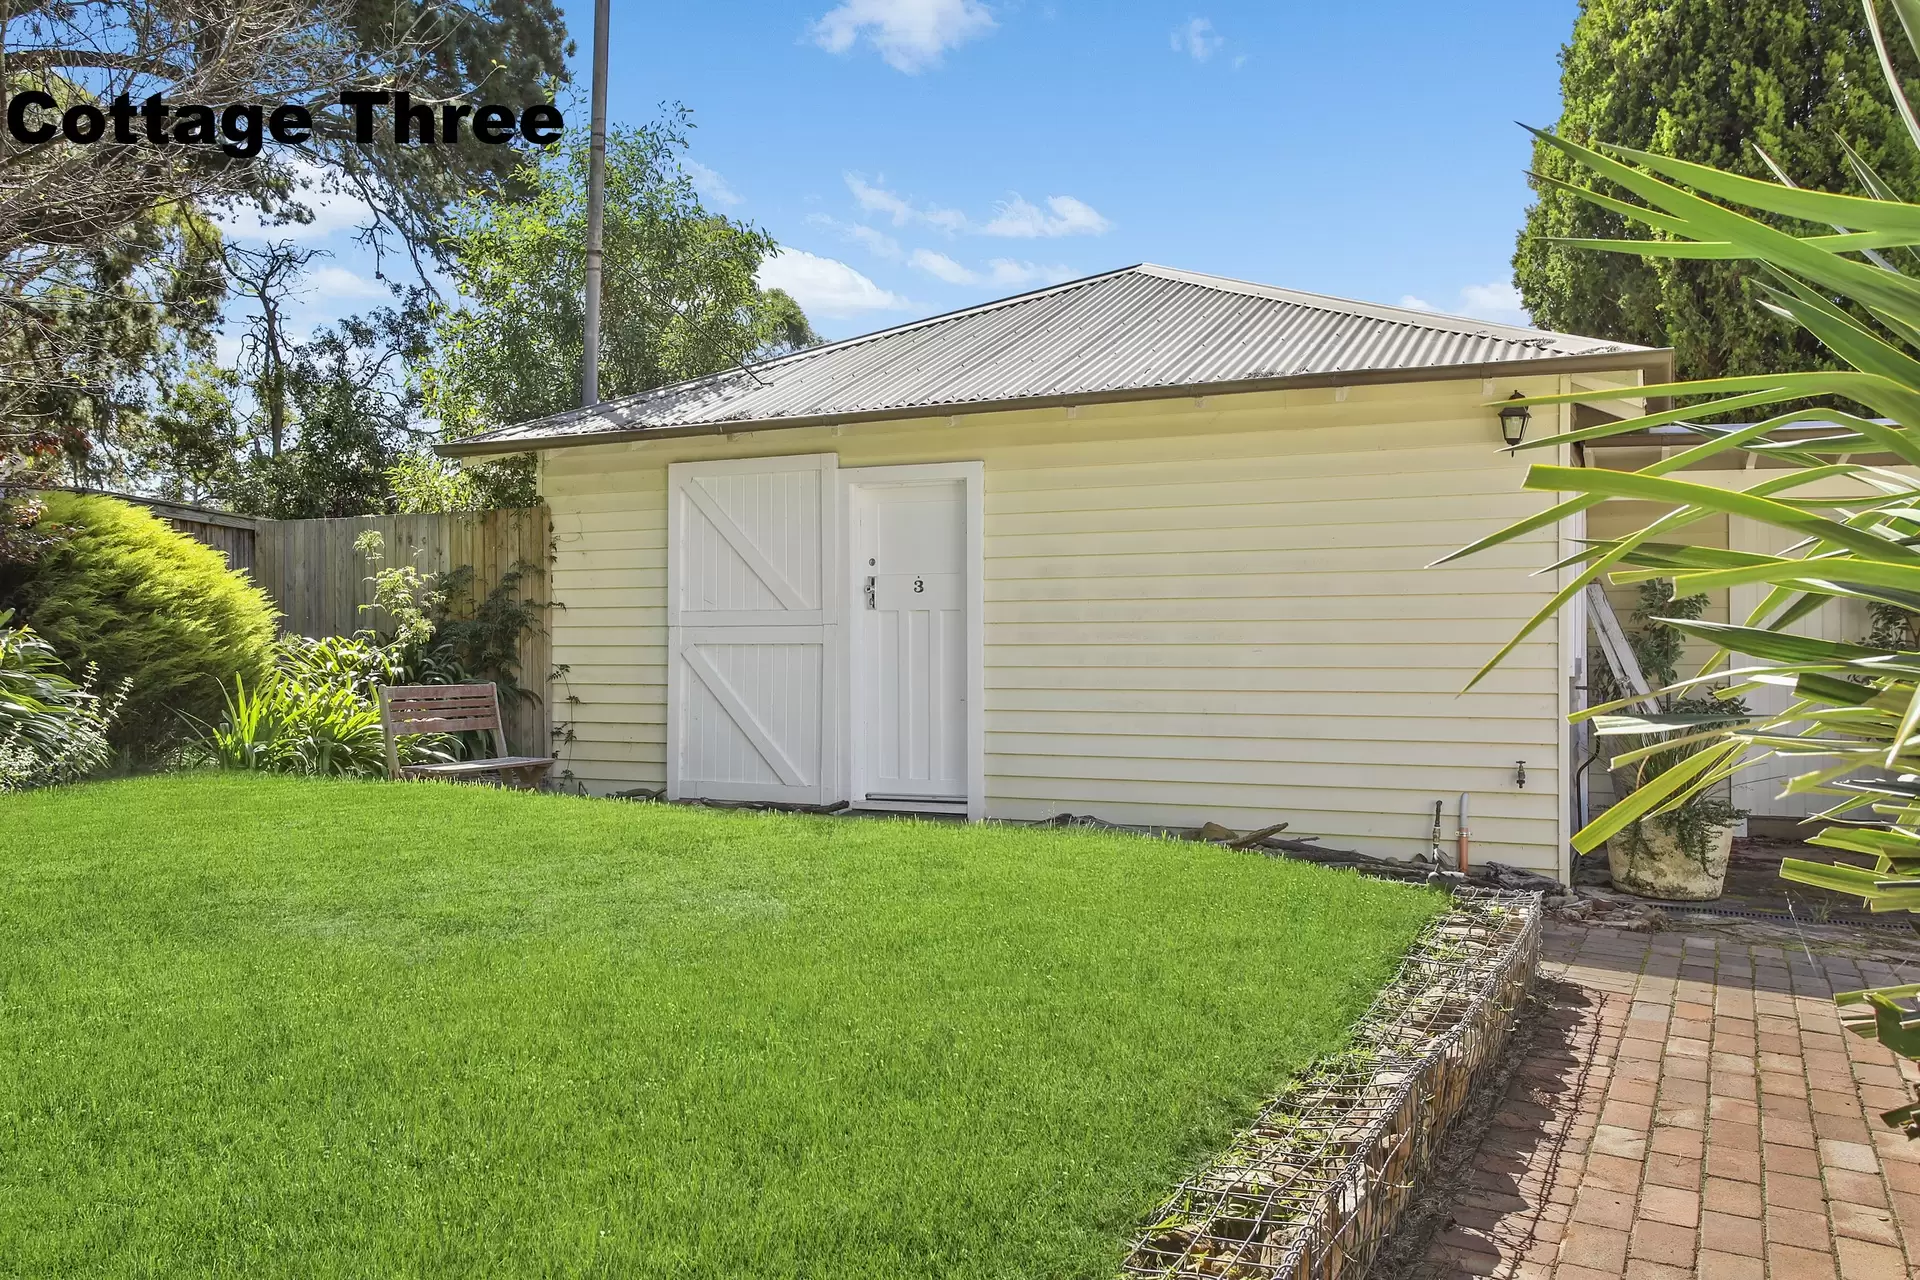 Photo #25: 13 Centennial Road, Bowral - Sold by Drew Lindsay Sotheby's International Realty